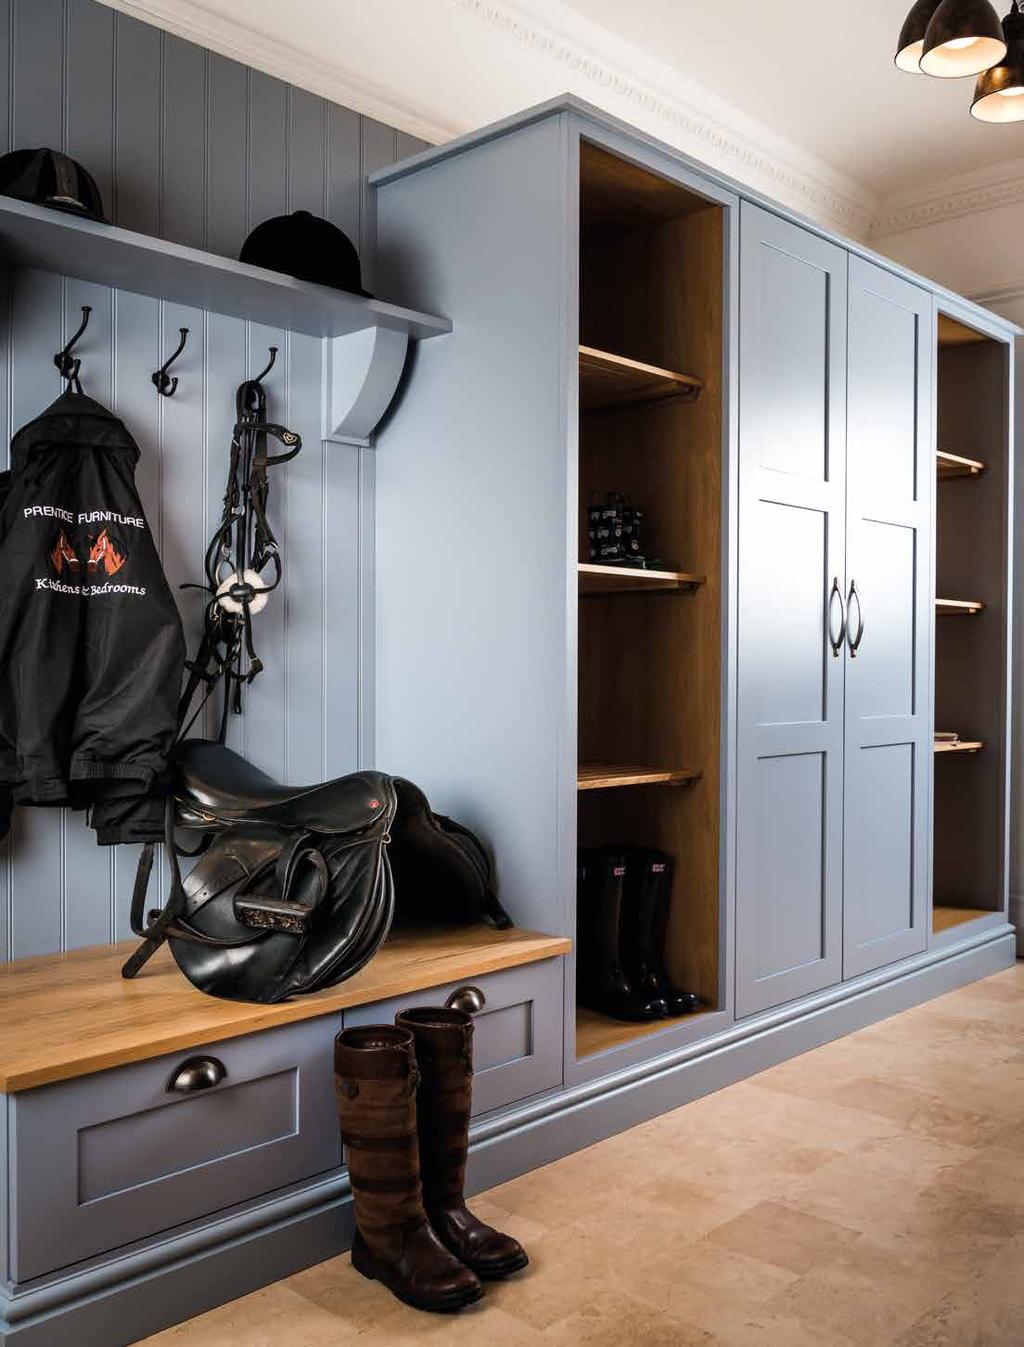 The Boot Room a perfect place for practical & stylish storage a must have for every home with built in